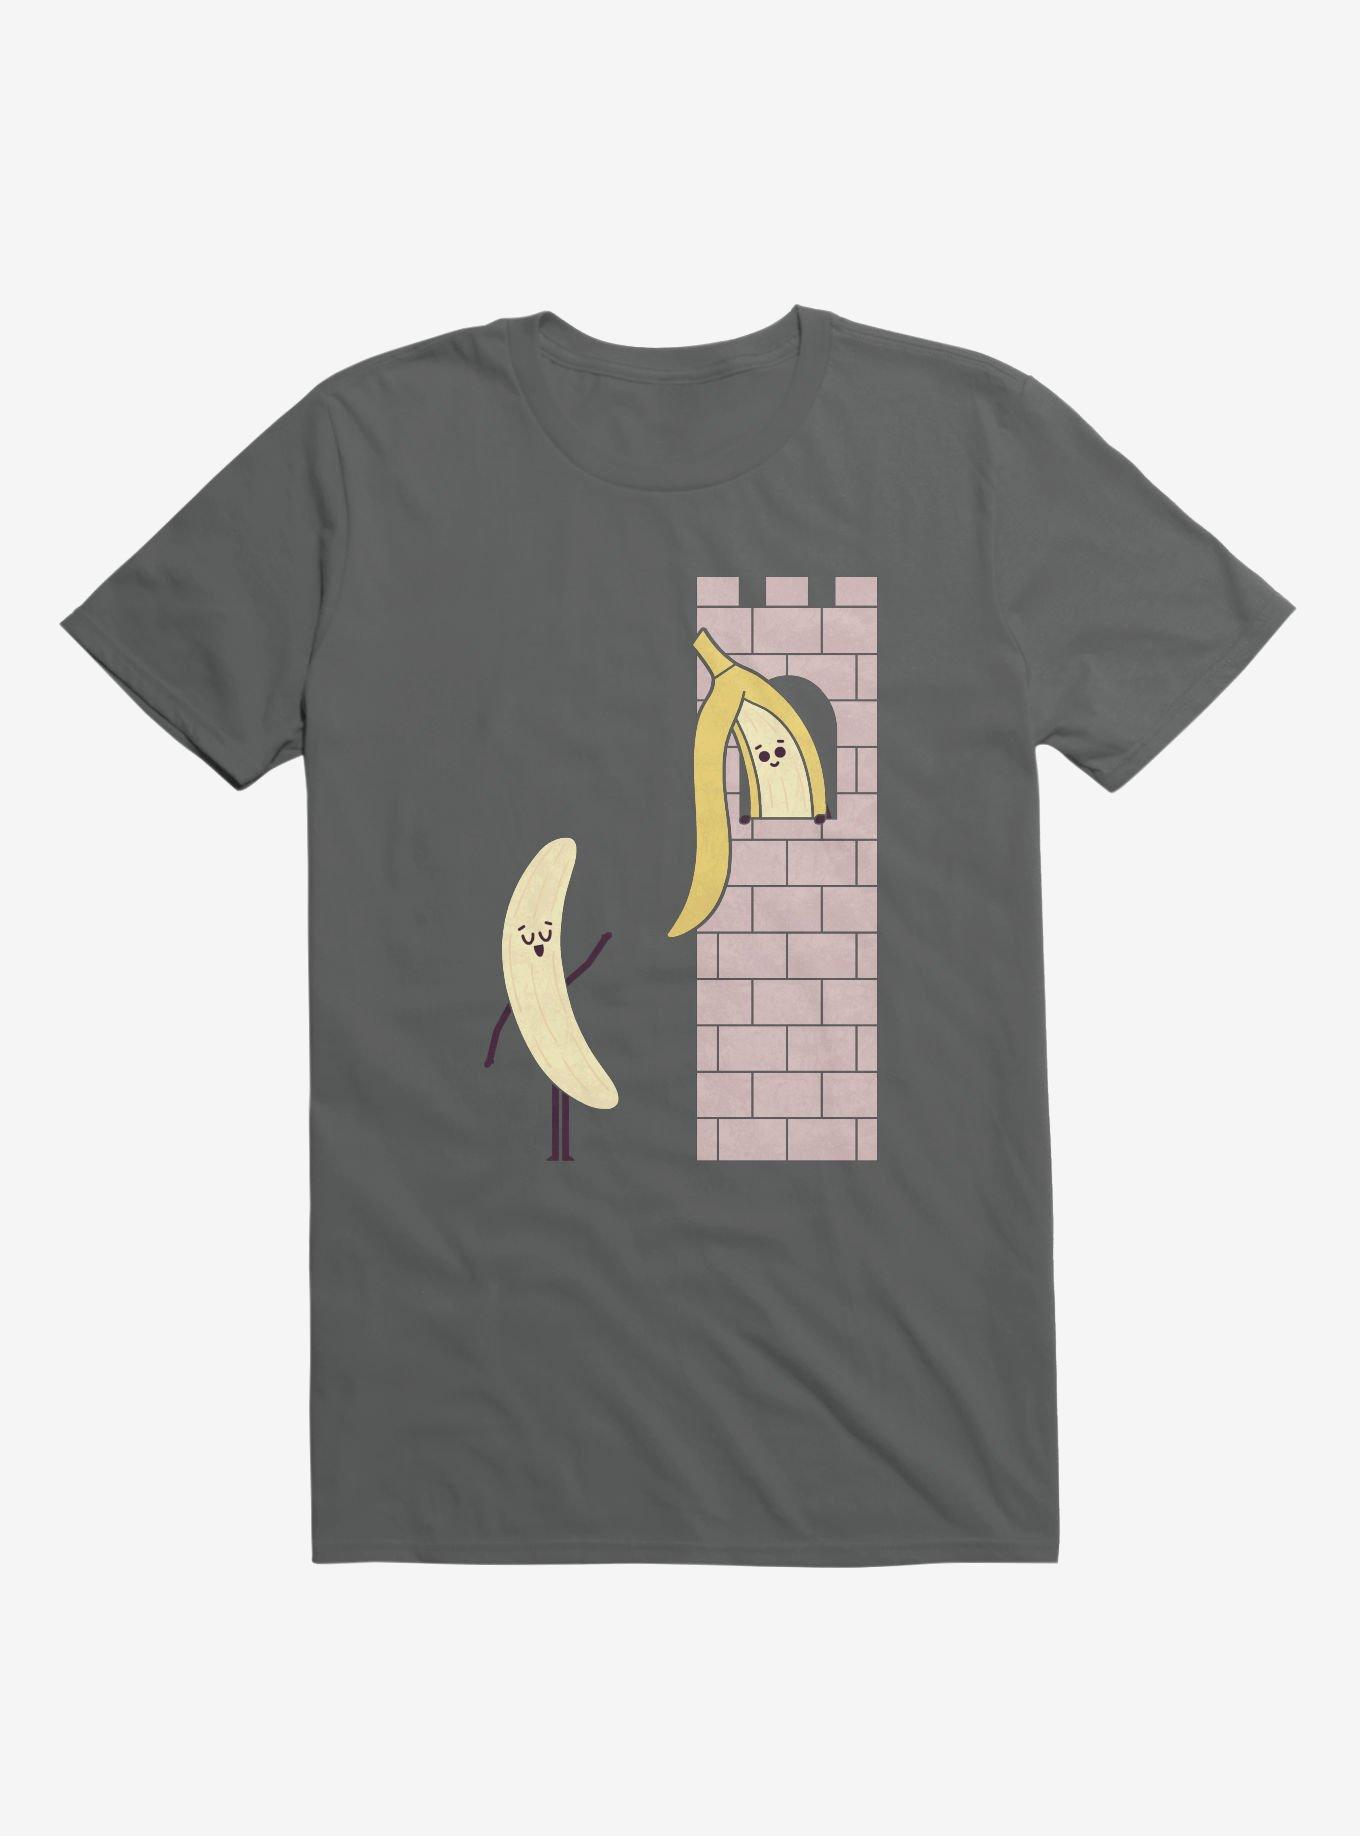 Let Down Your Peel Banana Castle Charcoal Grey T-Shirt